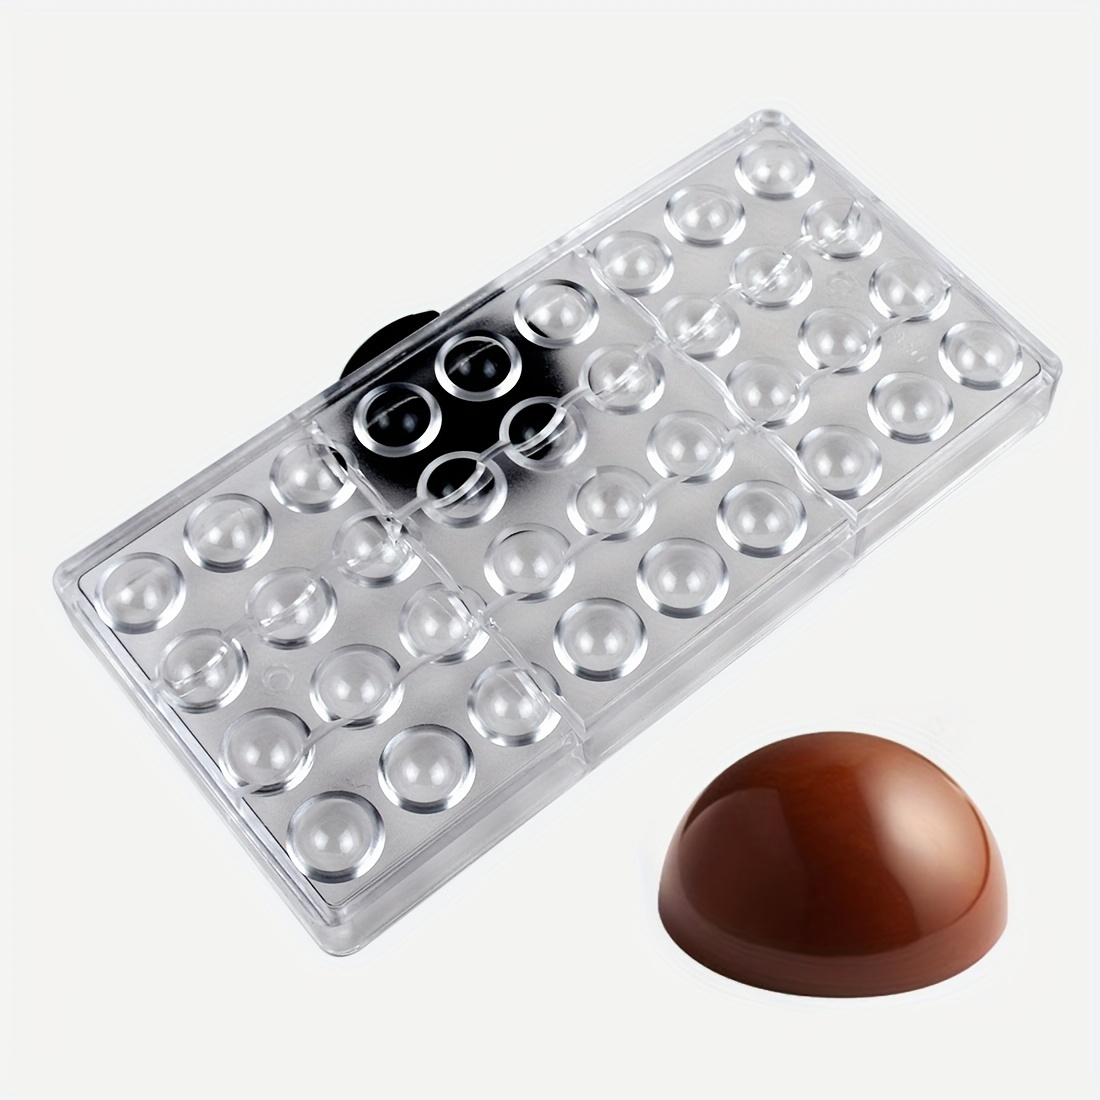 

1pc Polycarbonate Chocolate Mold Diy Candy Mould Clear Hard Plastic Bakeware Pastry Tools Small Easter Egg Smooth Surface, Kitchen Gadgets, Kitchen Accessories